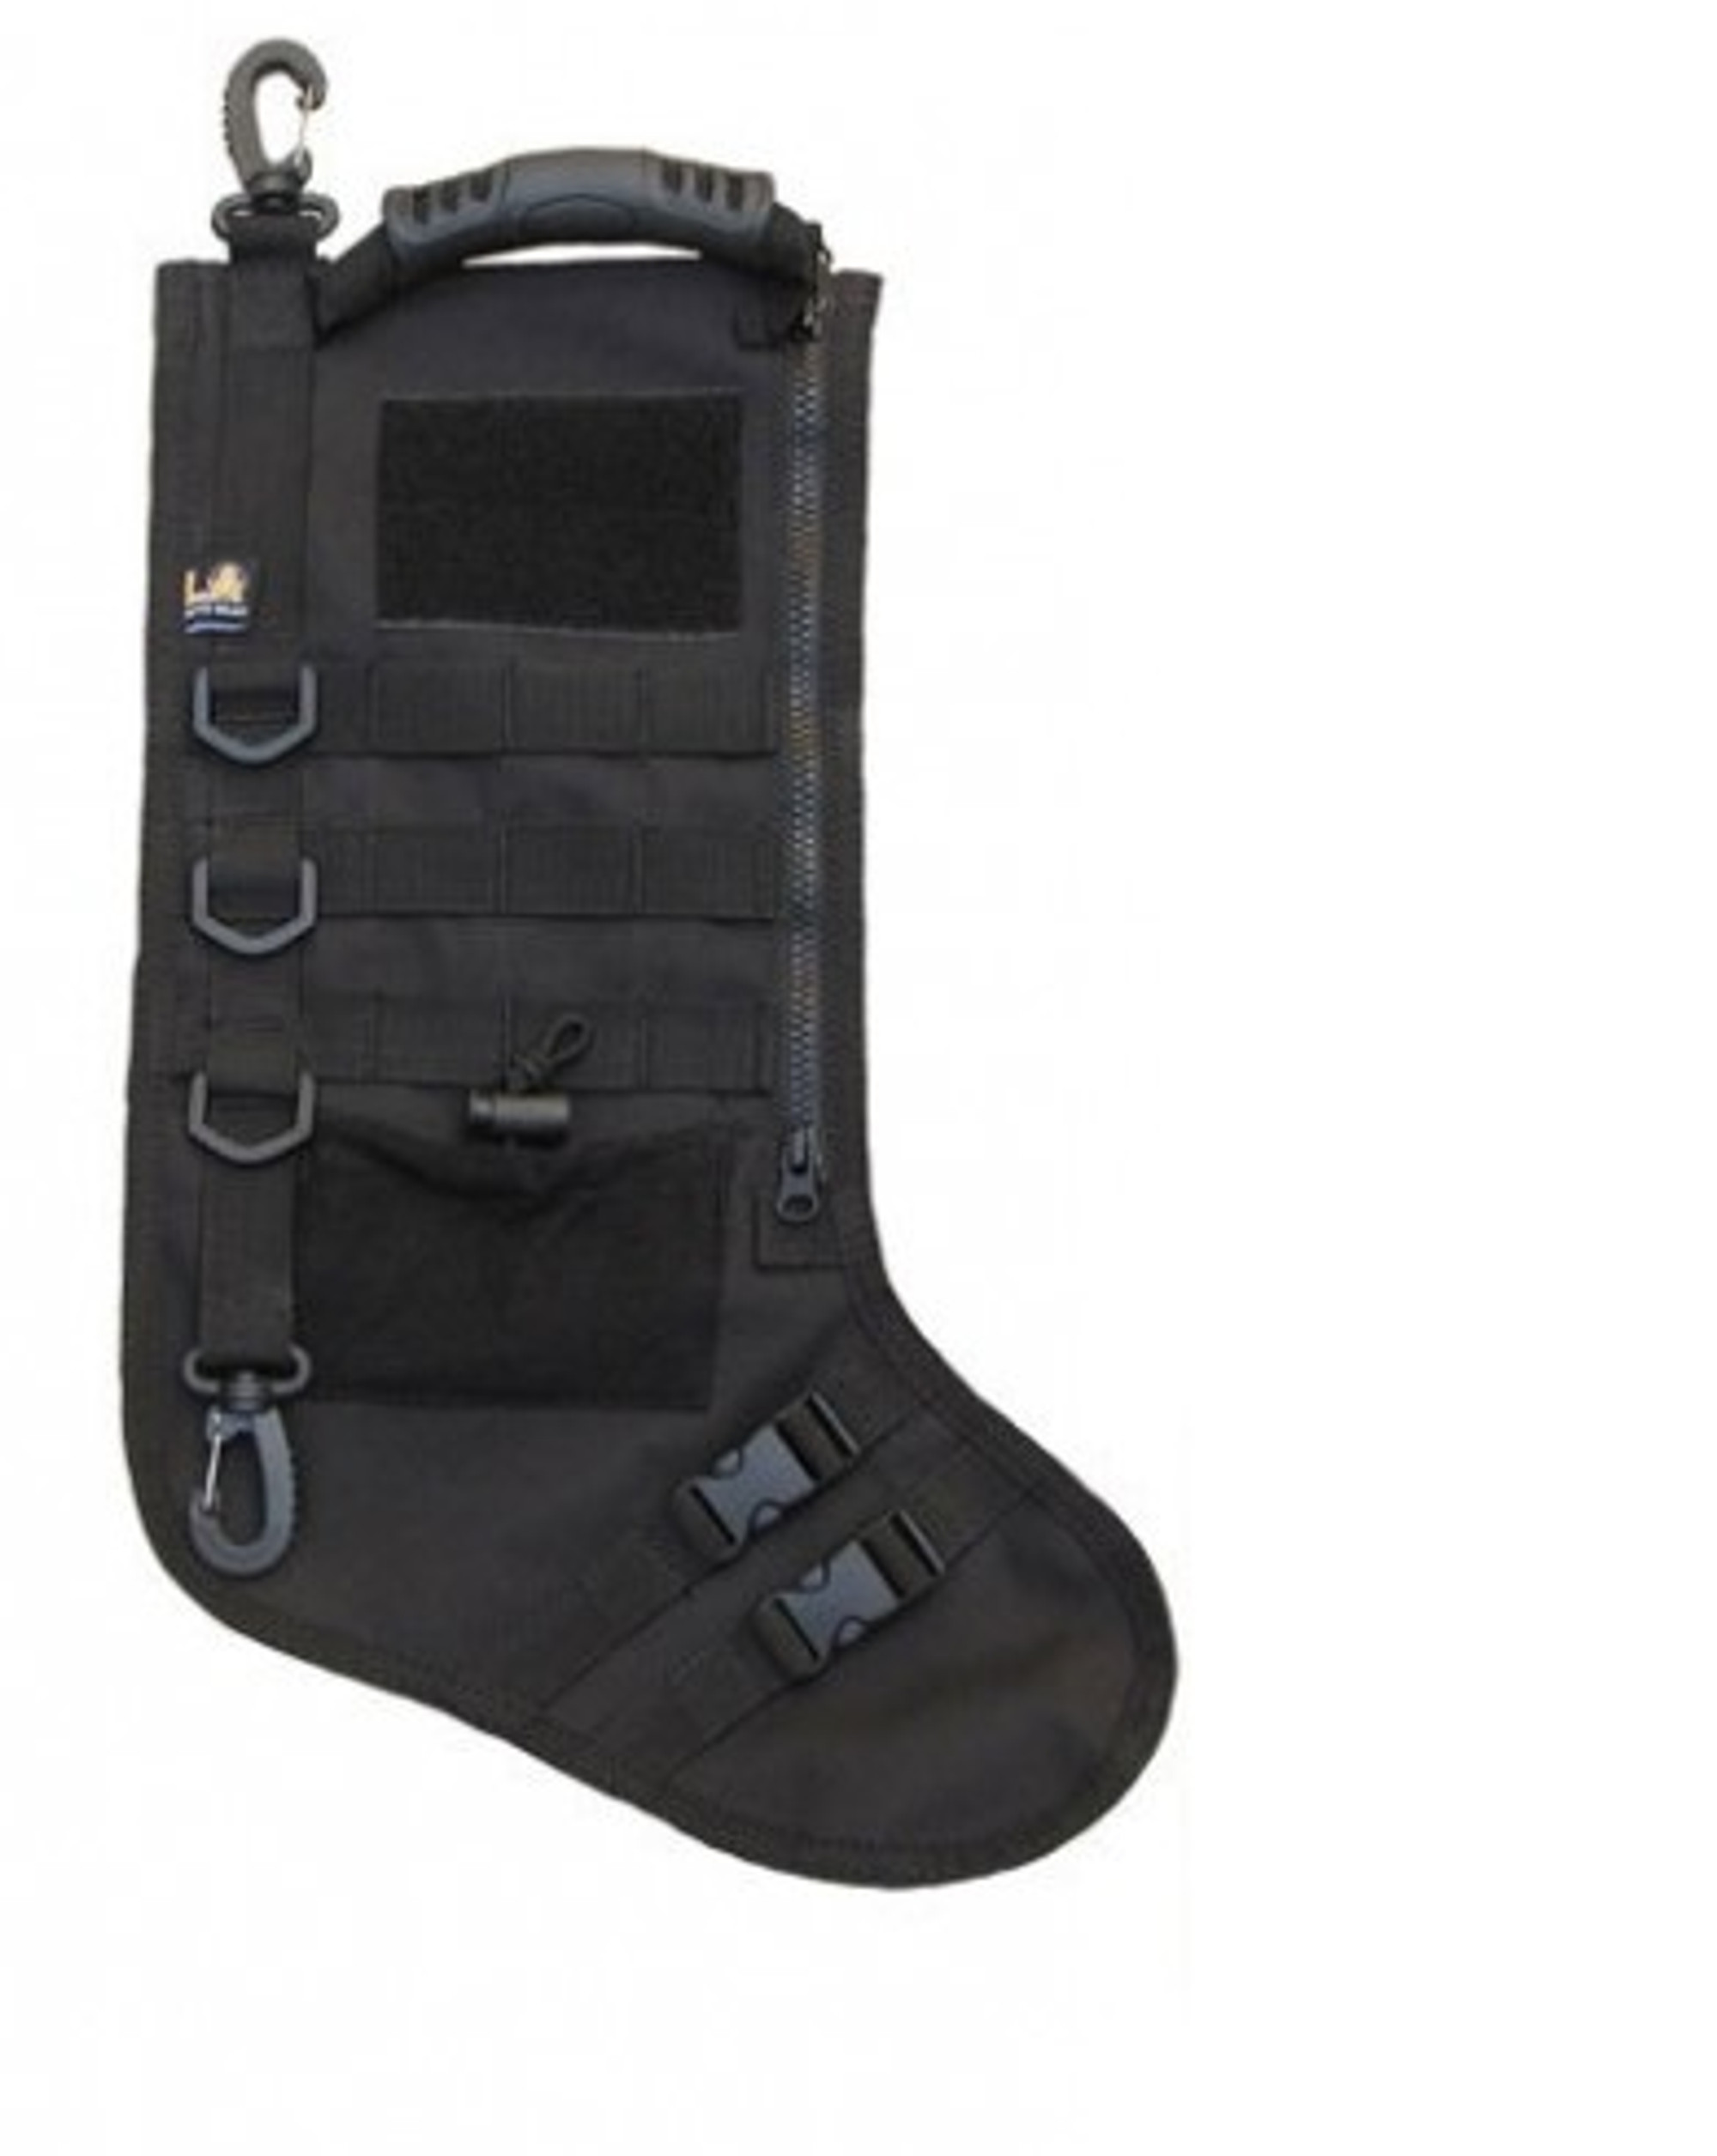 Tactical Military Stocking - Black